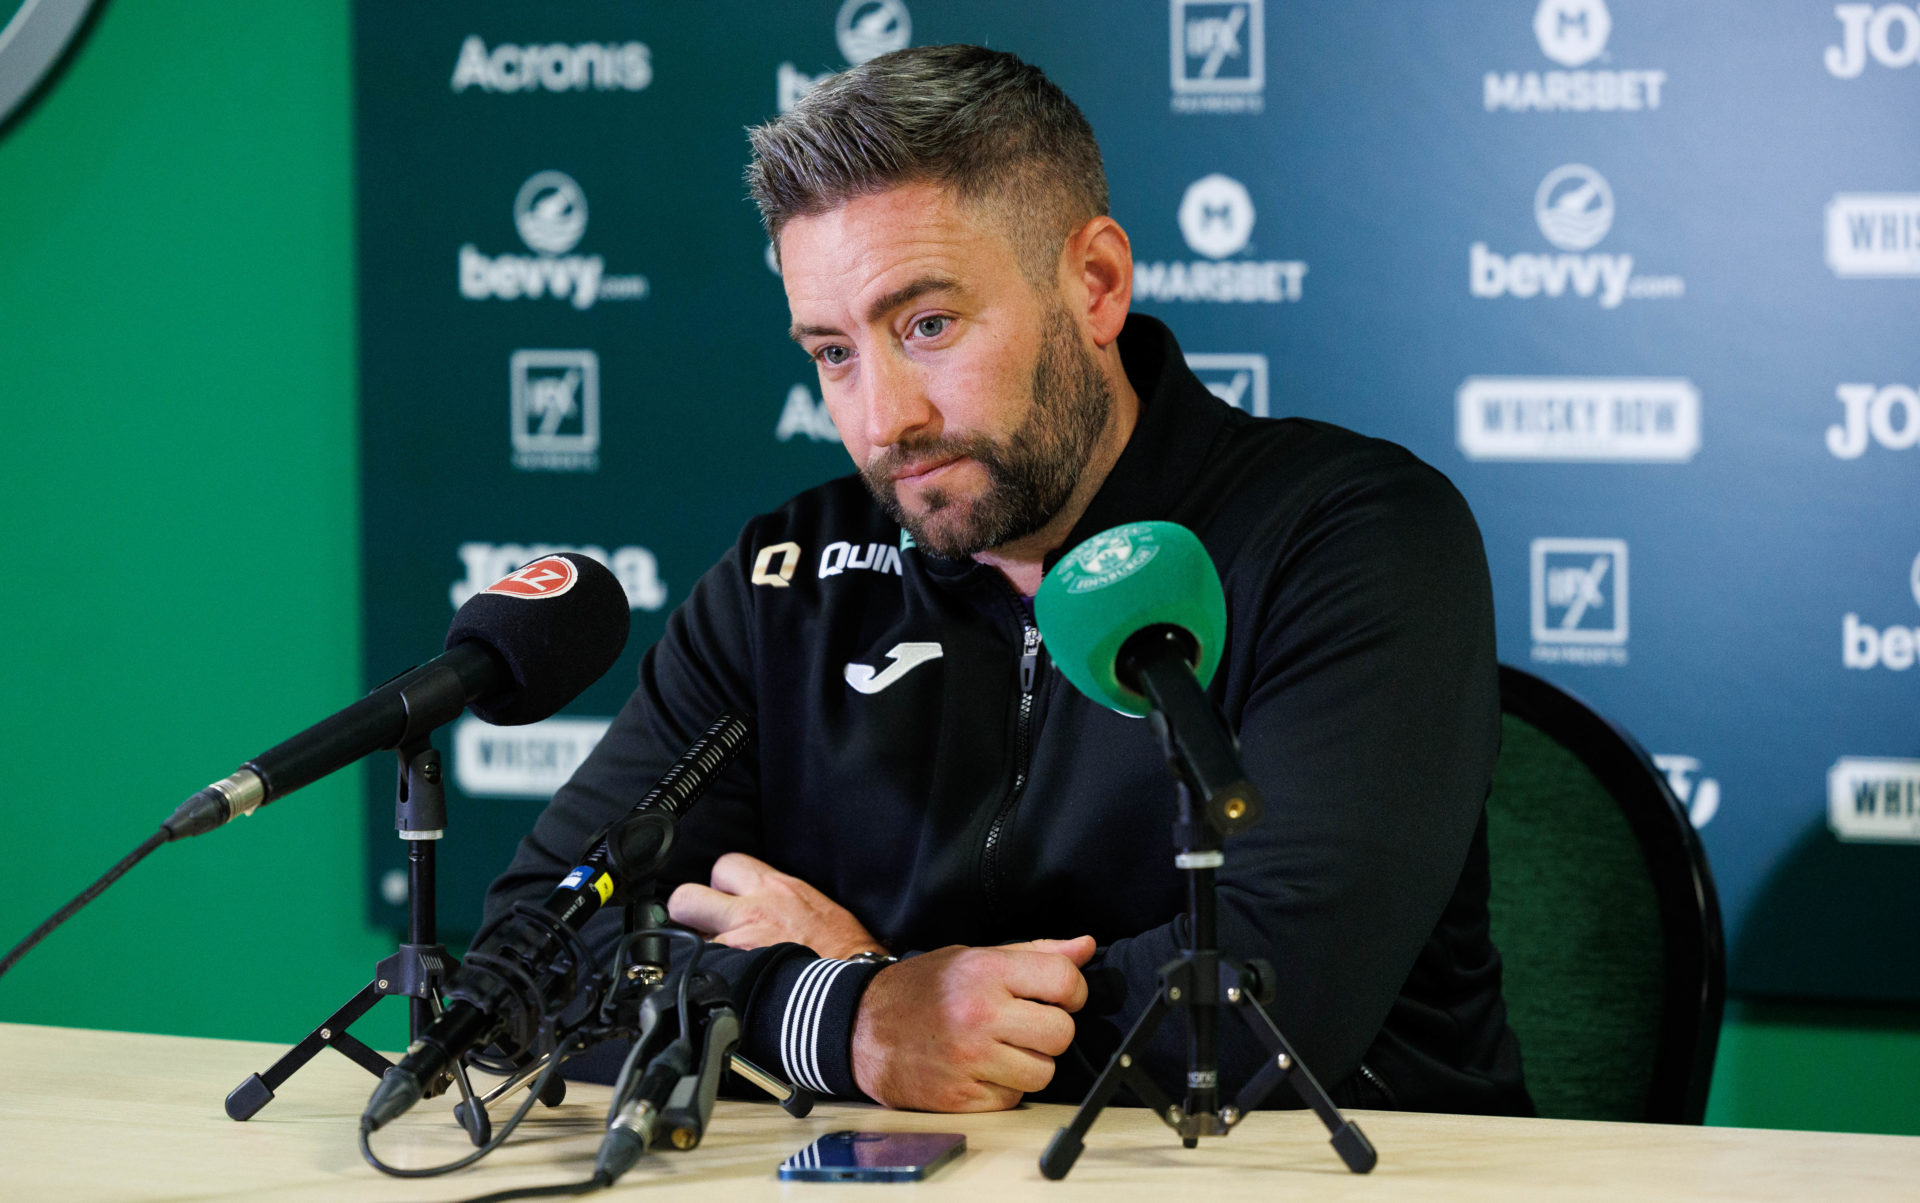 VIDEO: Lee Johnson warns Hibs can score their way to mouthwatering Aston Villa tie